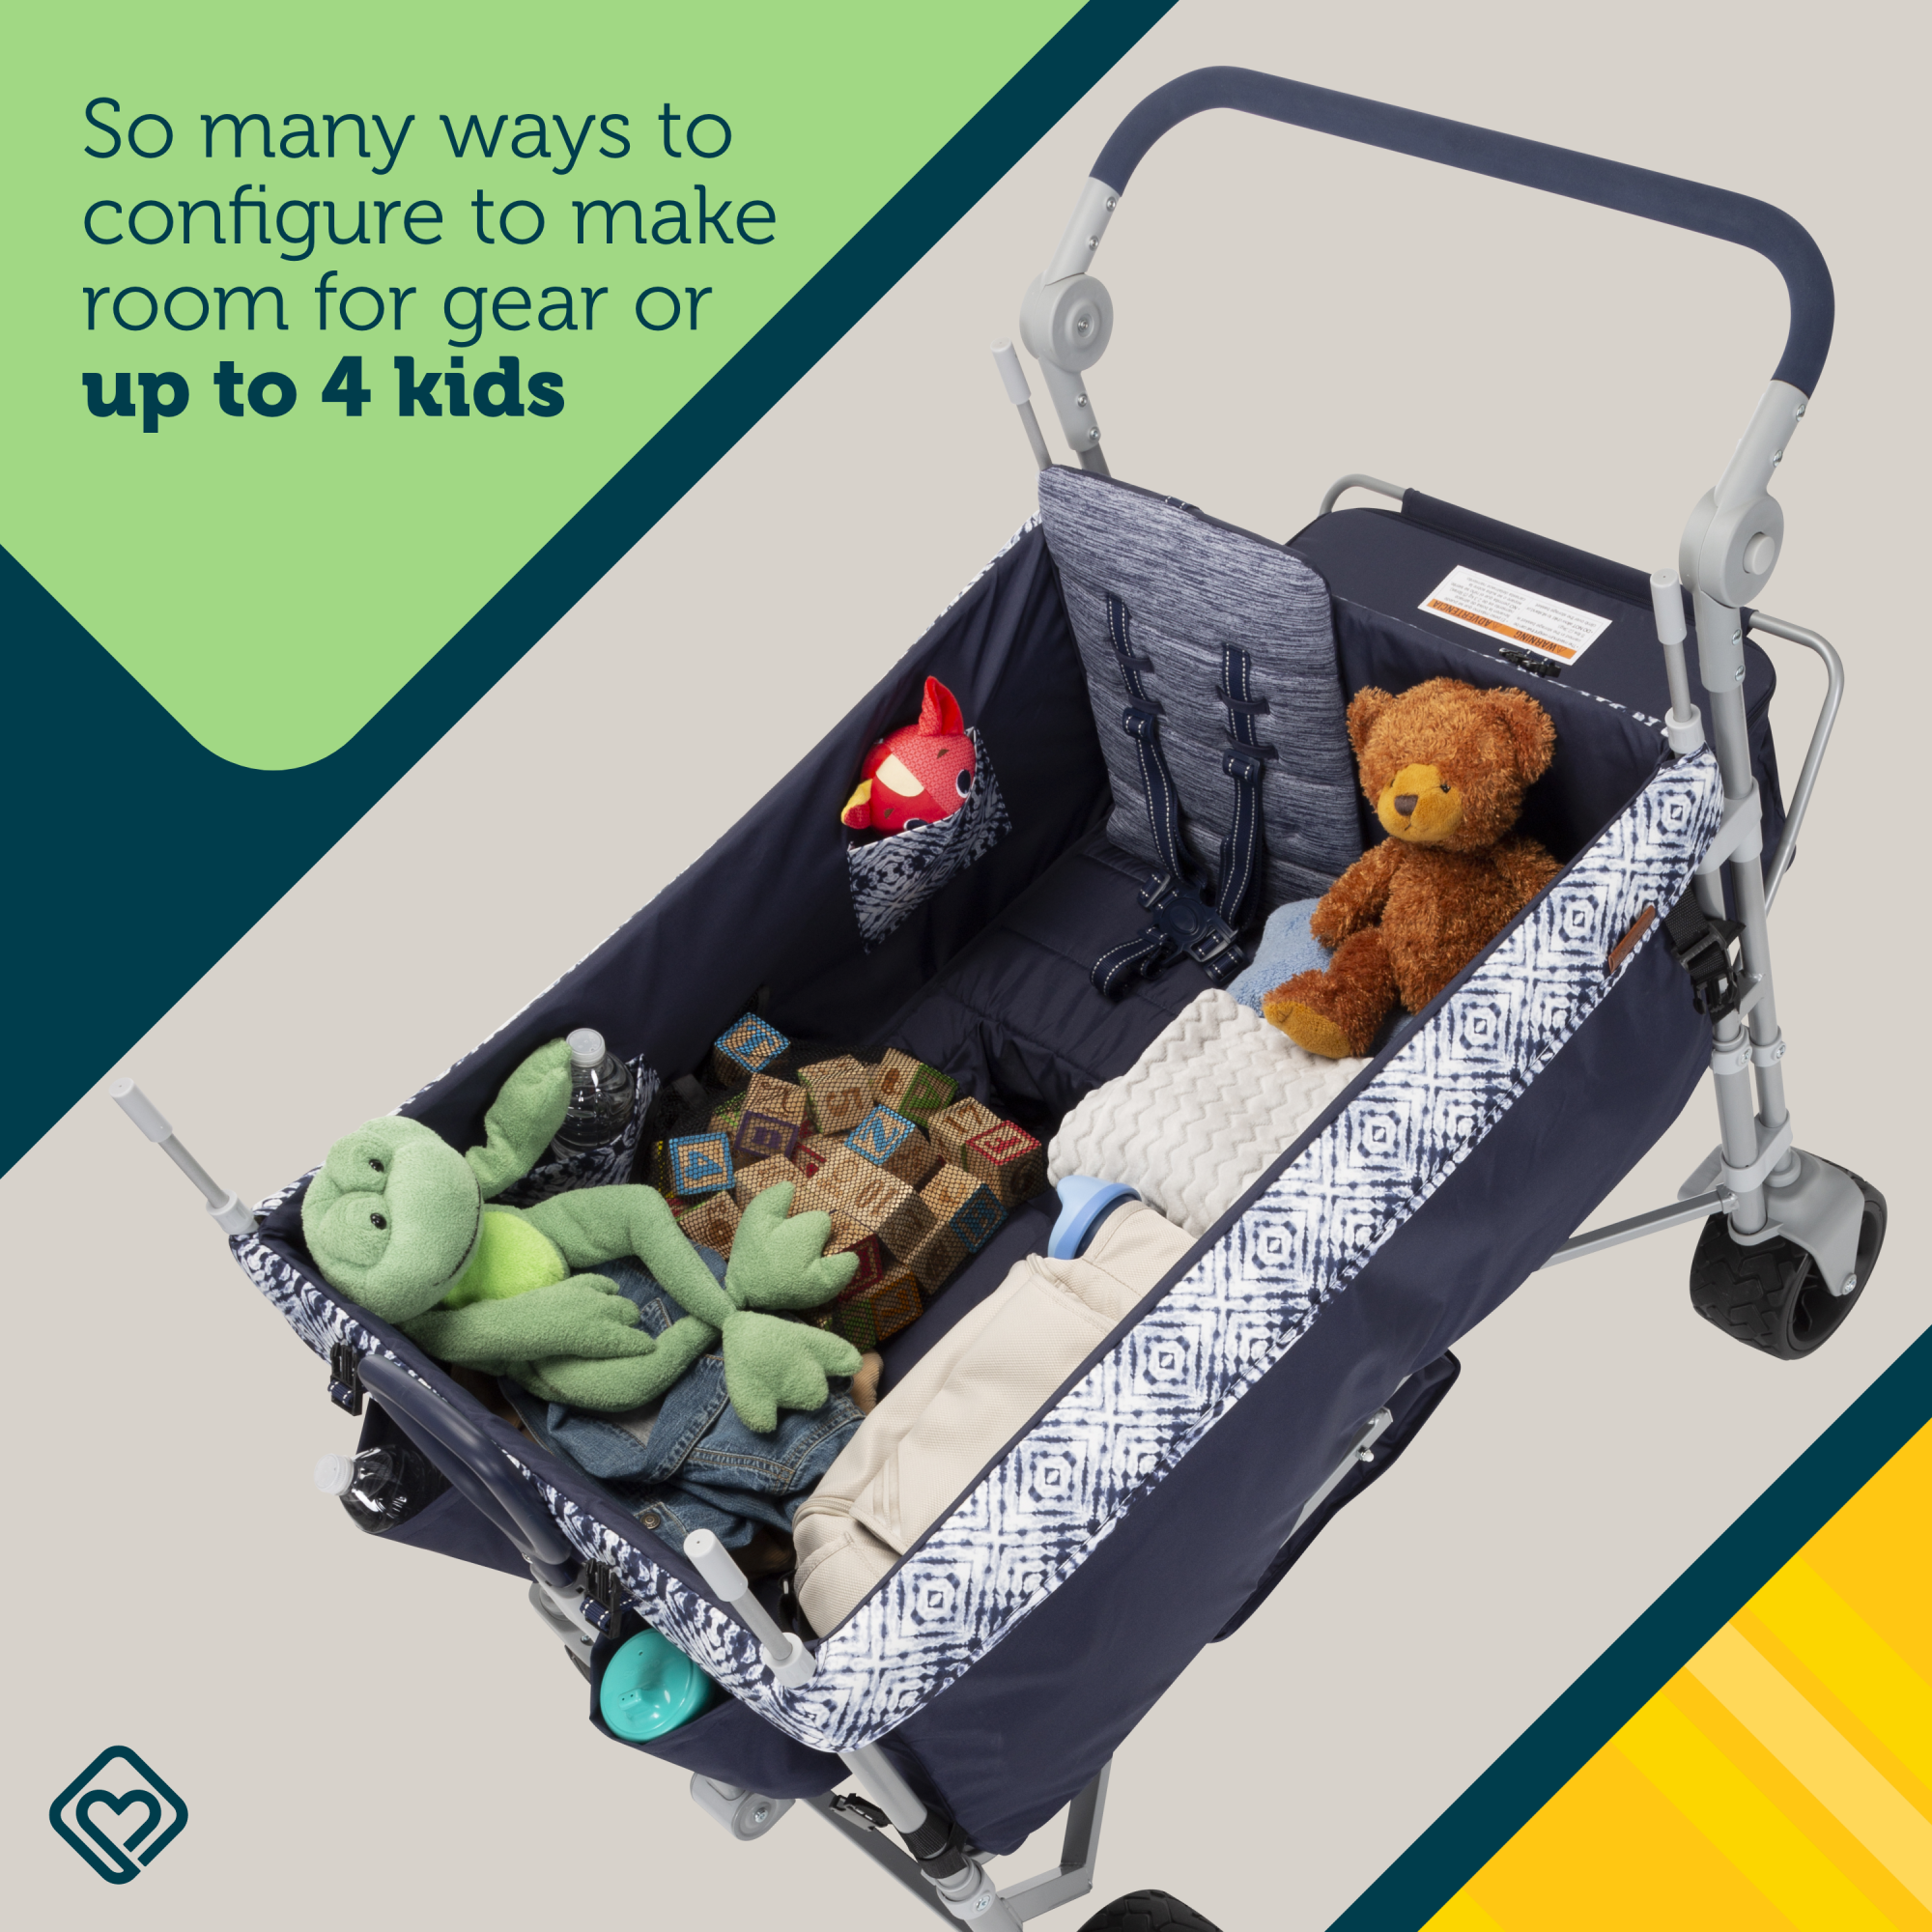 Summit Quad Wagon Stroller - so many ways to configure to make room for gear or up to 4 kids